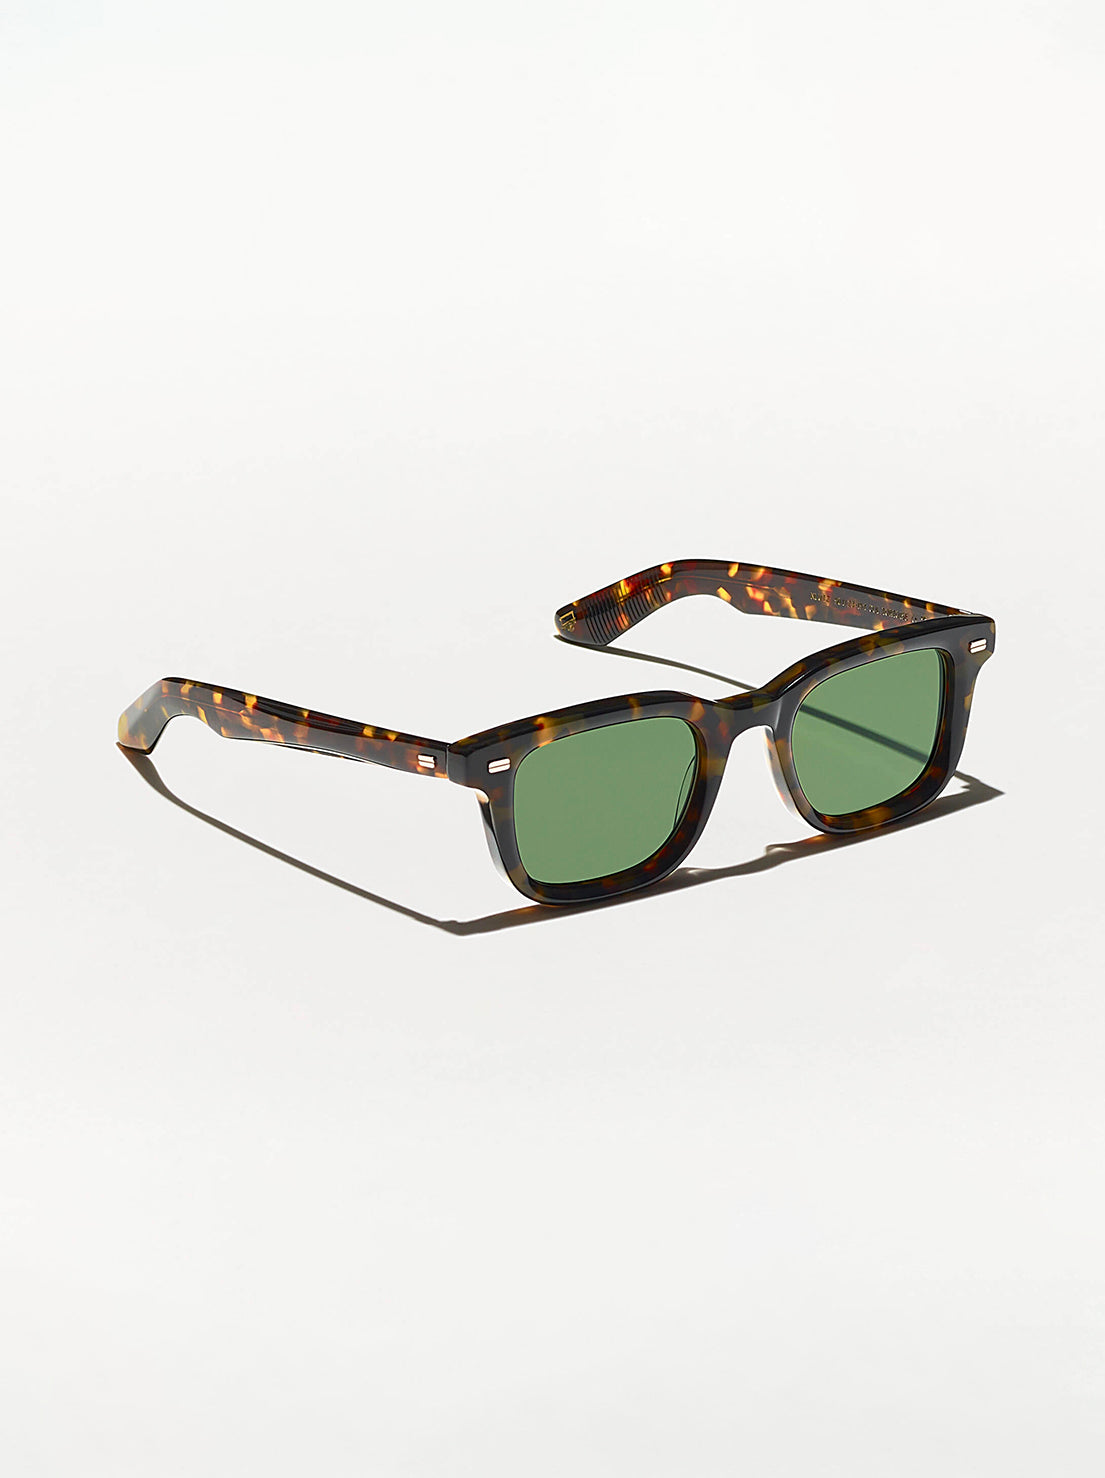 Load image into Gallery viewer, Moscot - Klutz Sunglasses in Tortoise 50 (Wide) - Cr -39 Green Lens
